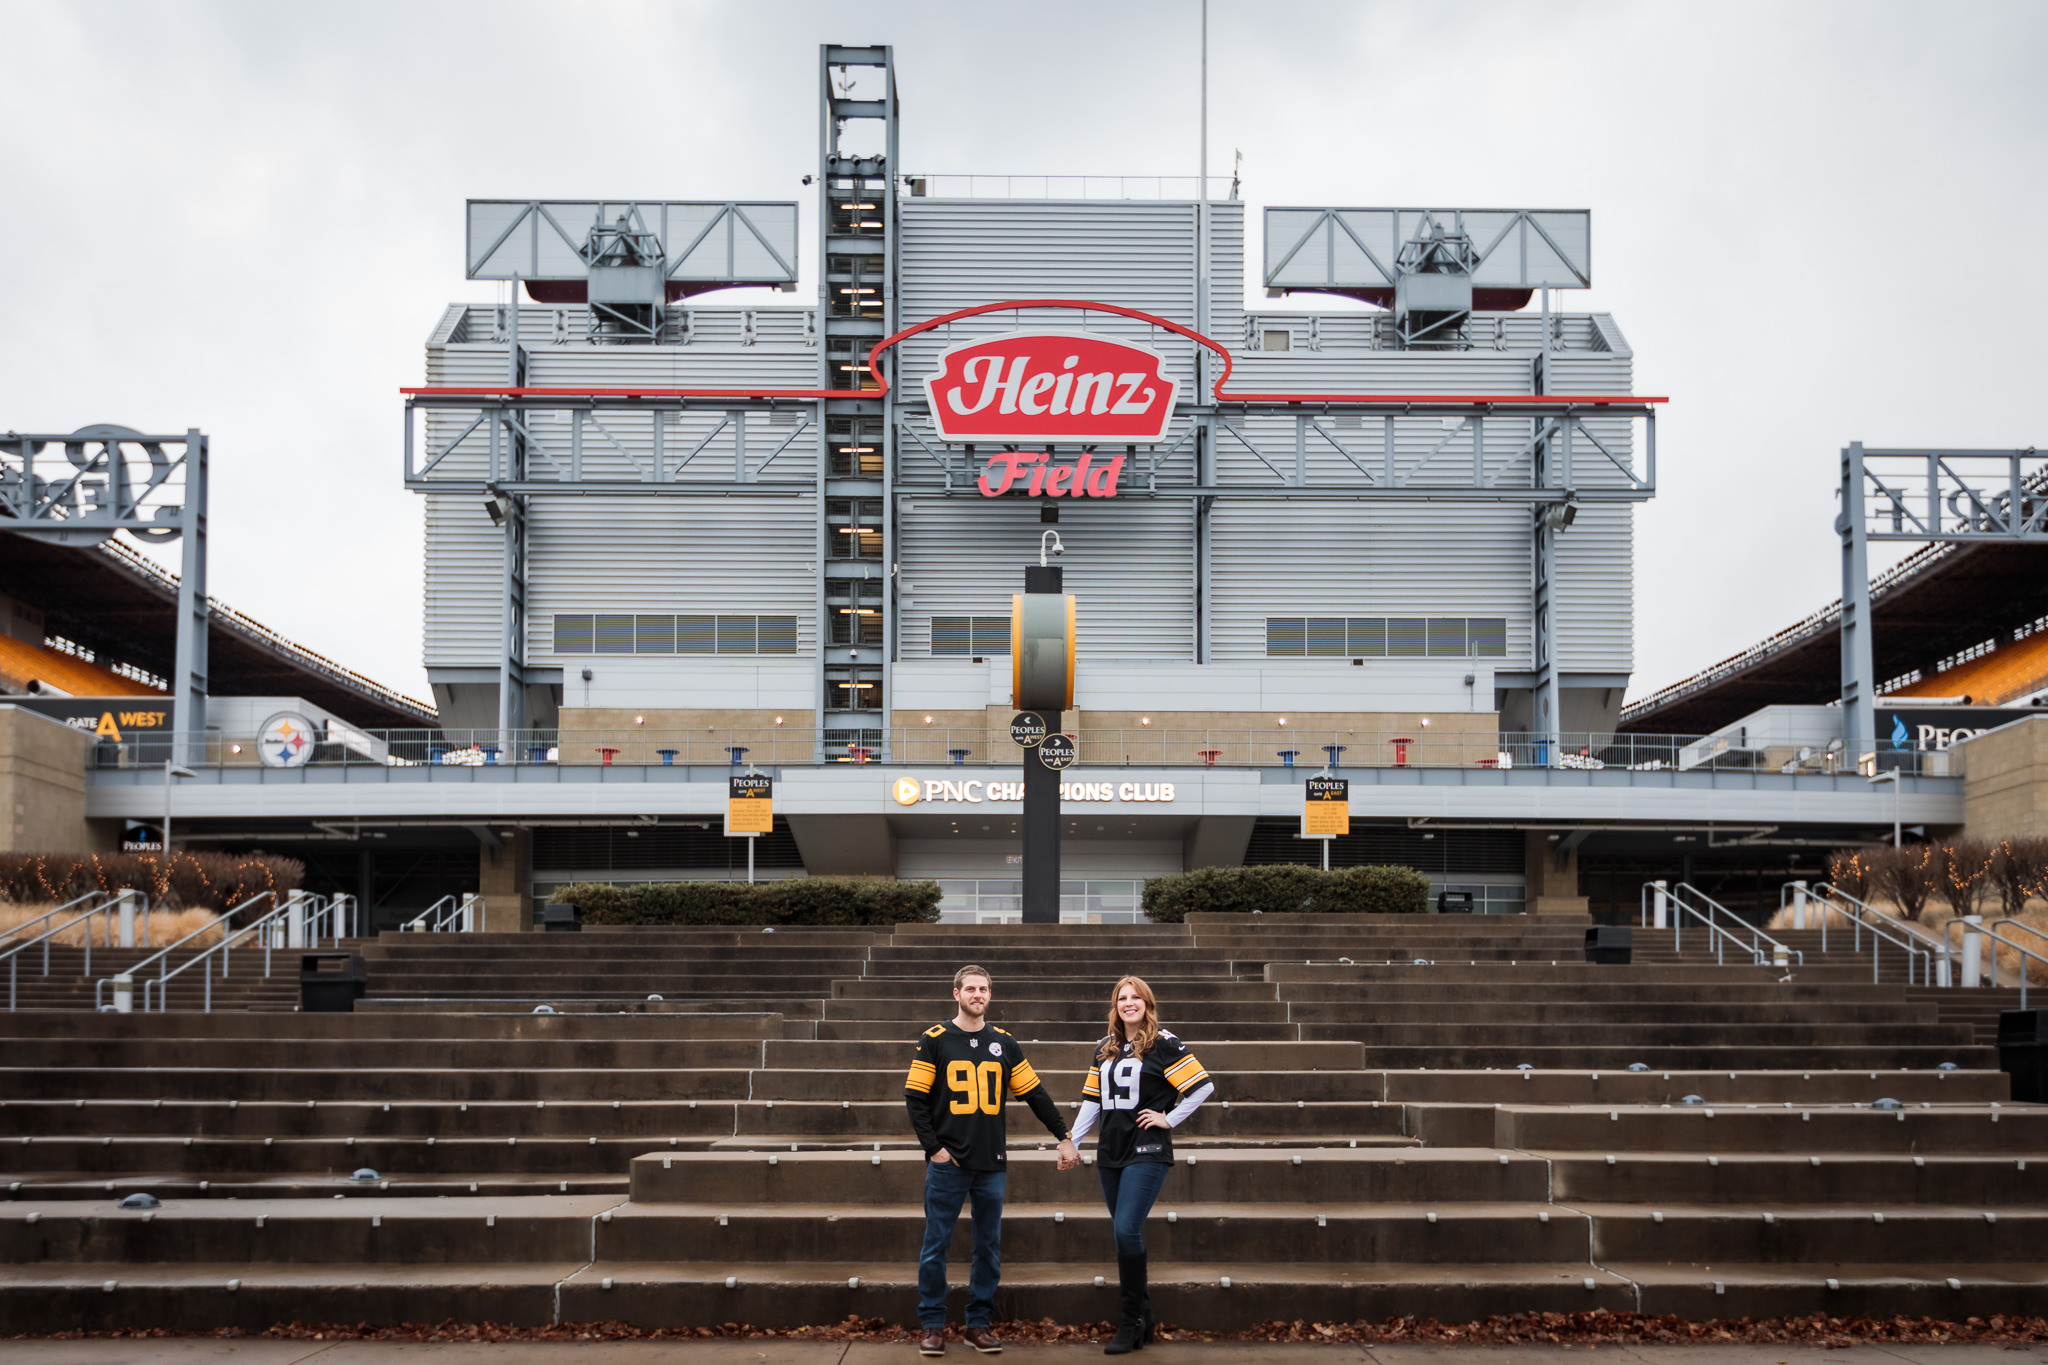 Engaged couple wearing Steelers jerseys holding hands in front of Heinz Field in Pittsburgh, PA